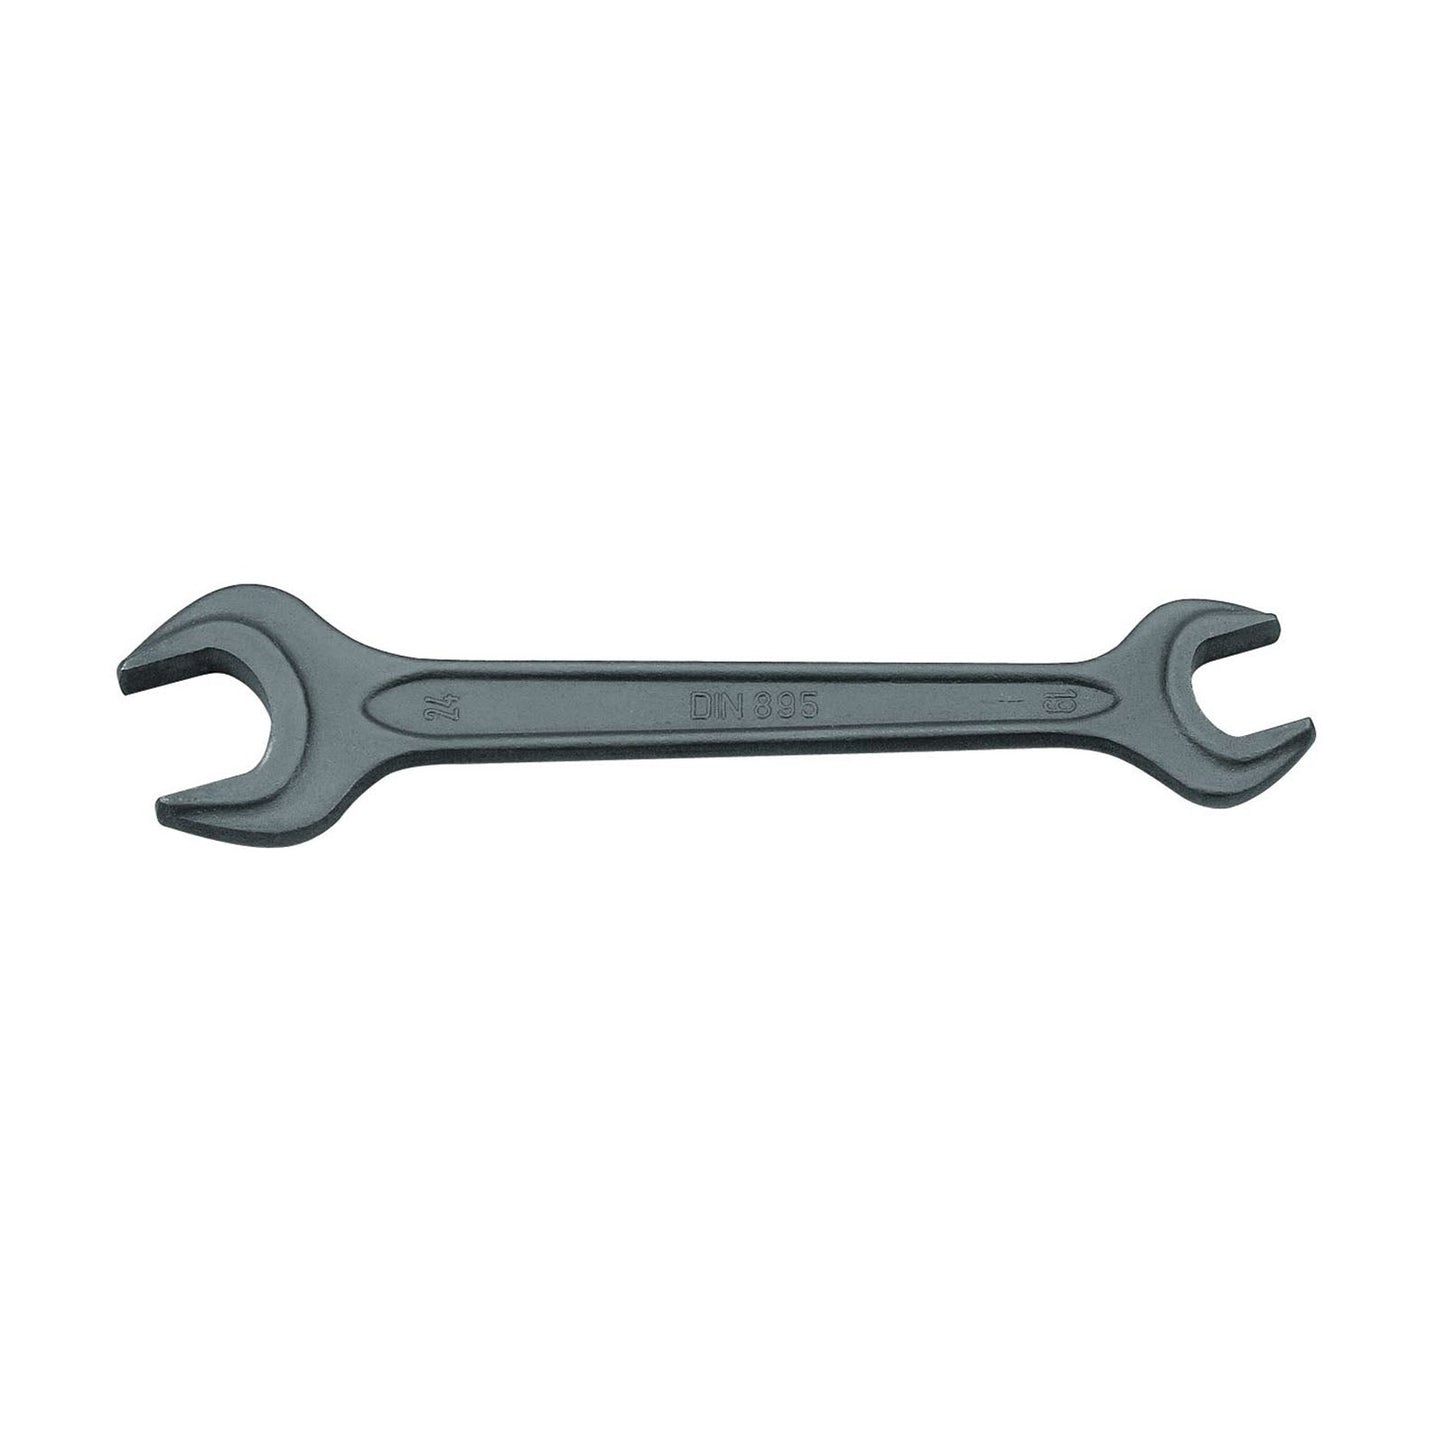 GEDORE 895 10X11 - 2-Mount Fixed Wrench, 10x11 (6584720)